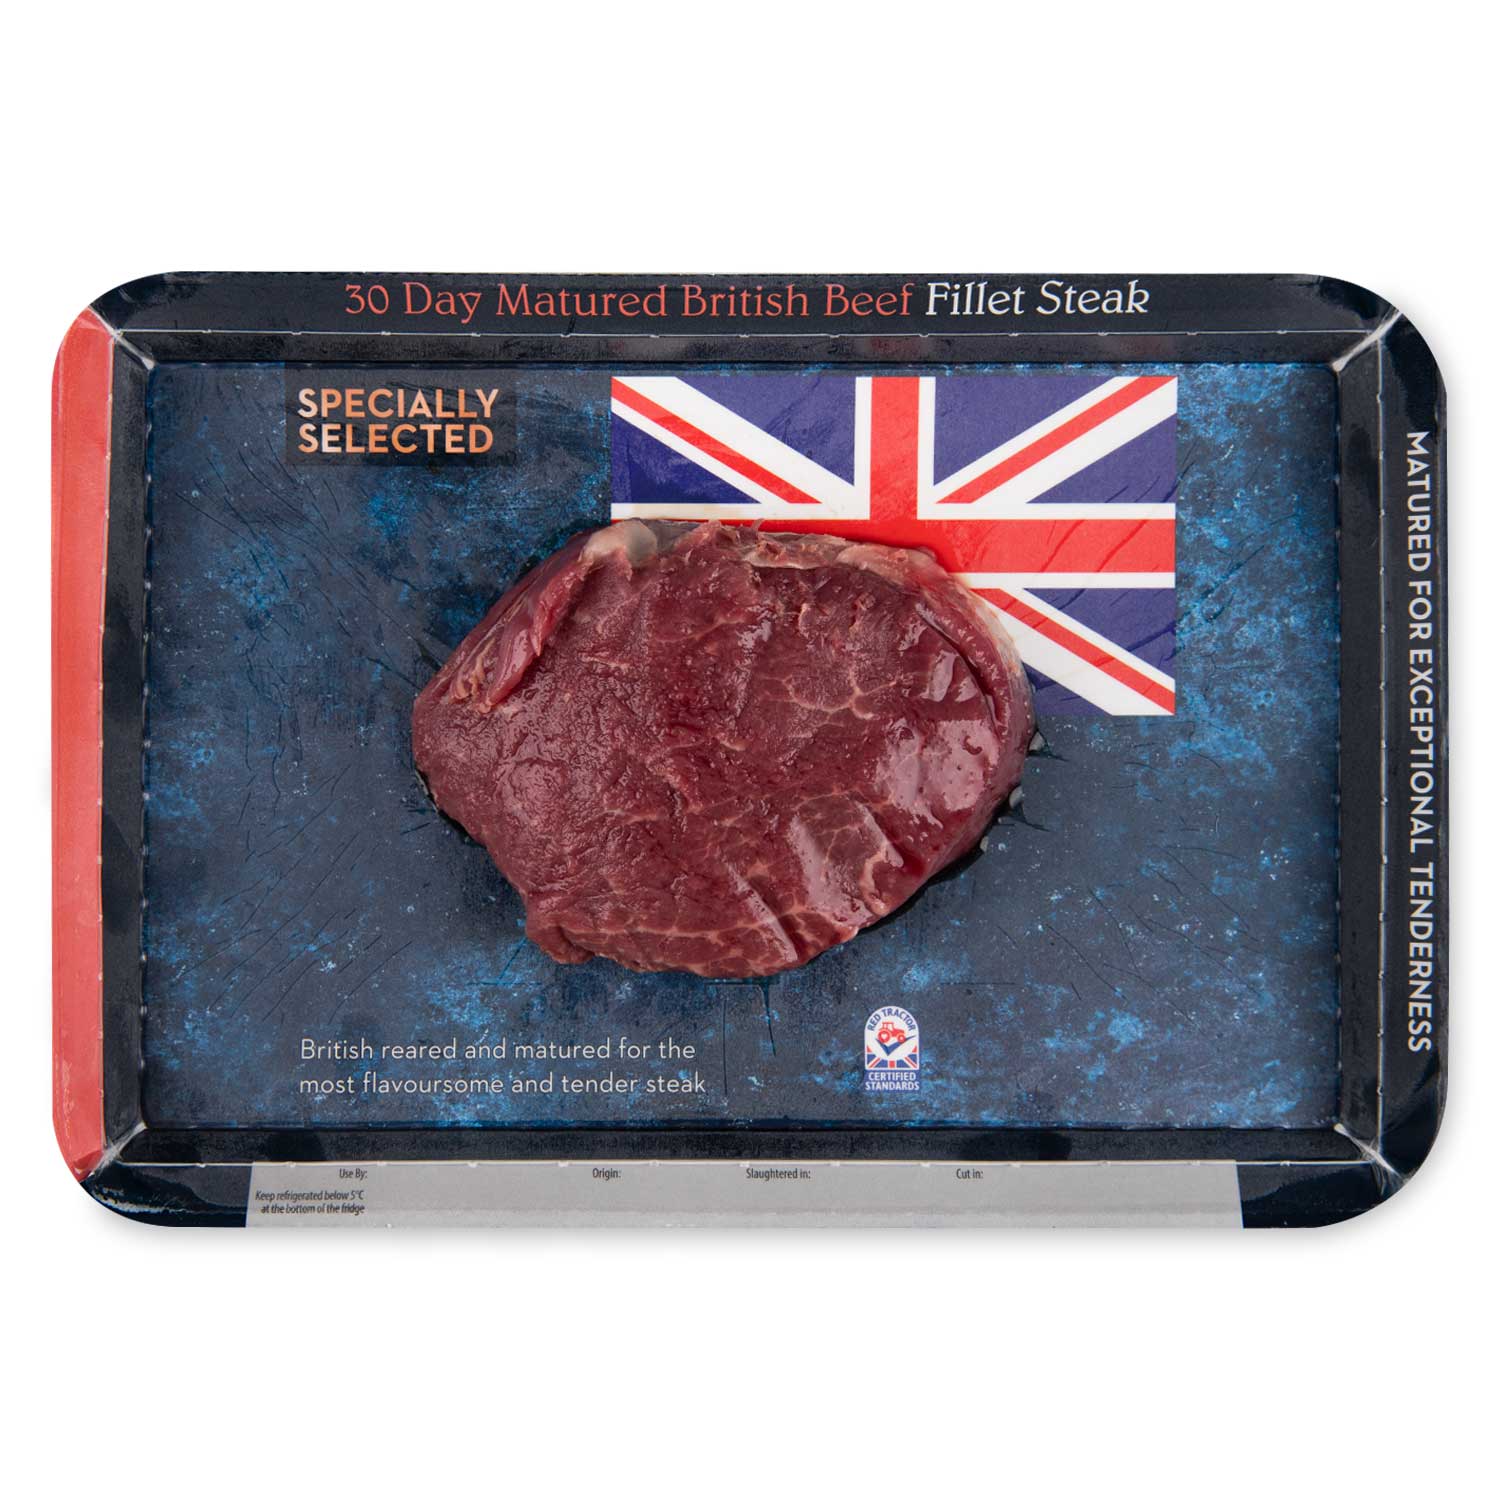 Specially Selected 30 Day Matured British Beef Fillet Steak 170g